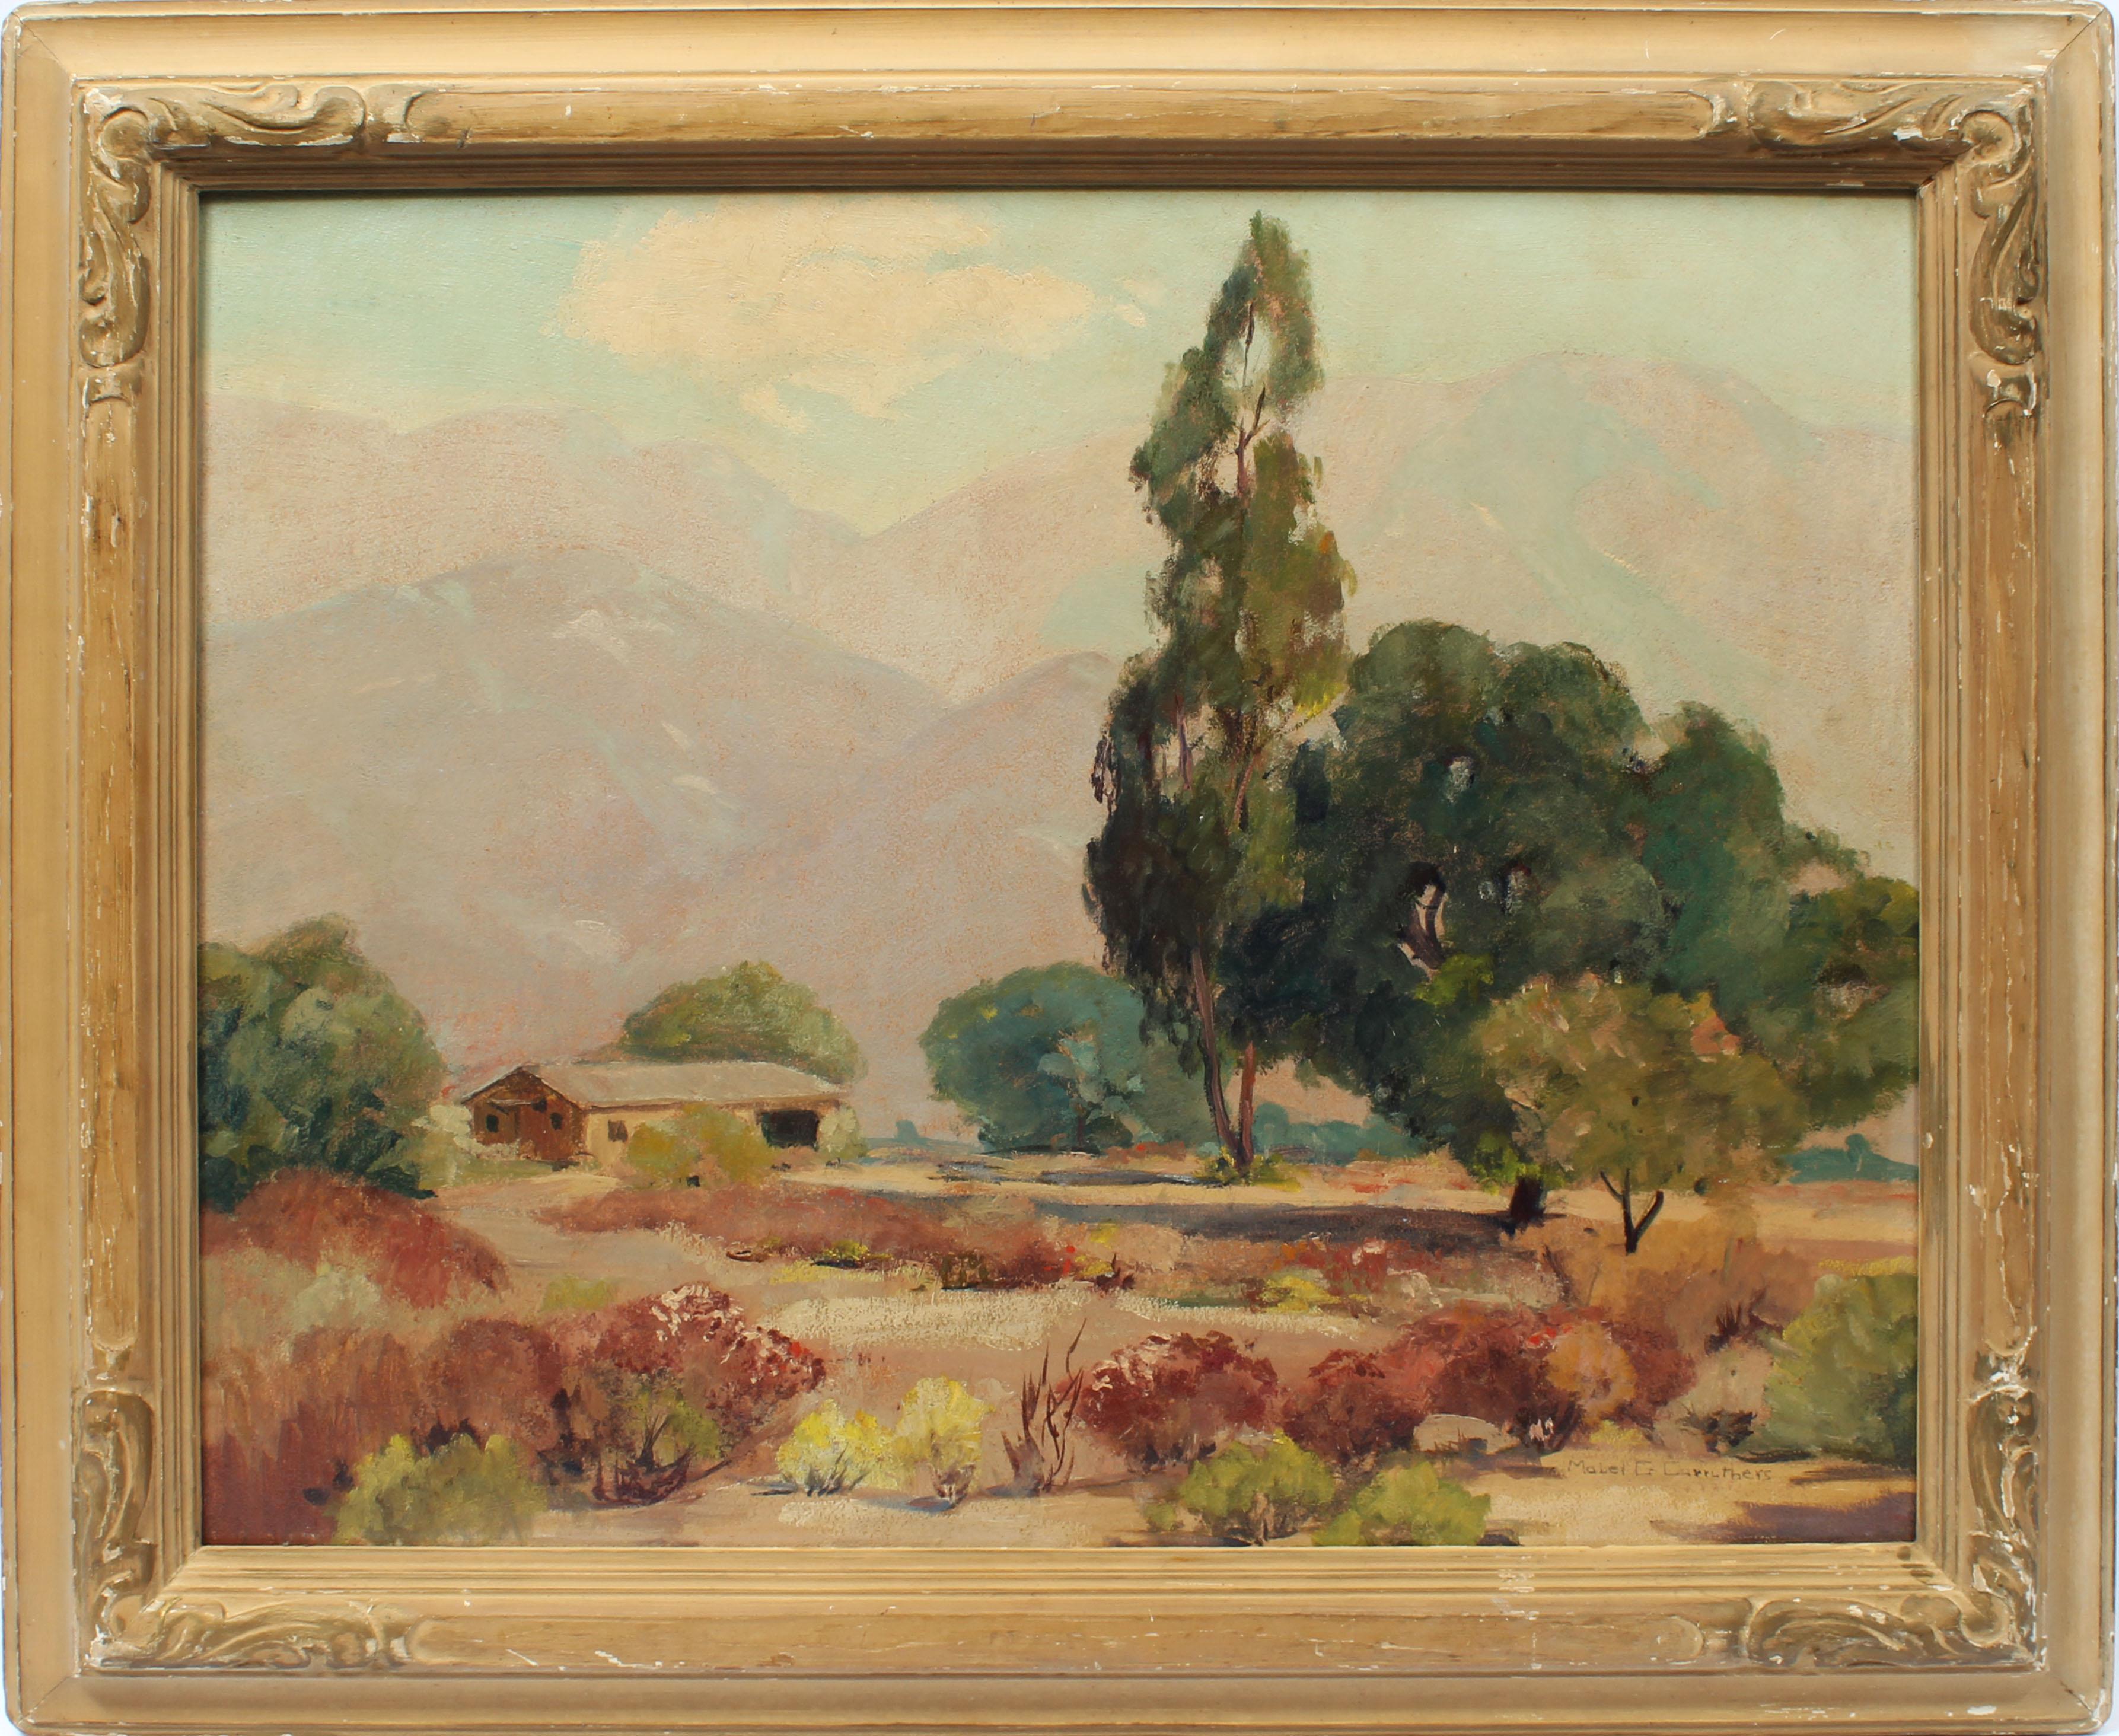 Unknown Landscape Painting - Antique American Original California Mountain Valley Landscape Oil Painting